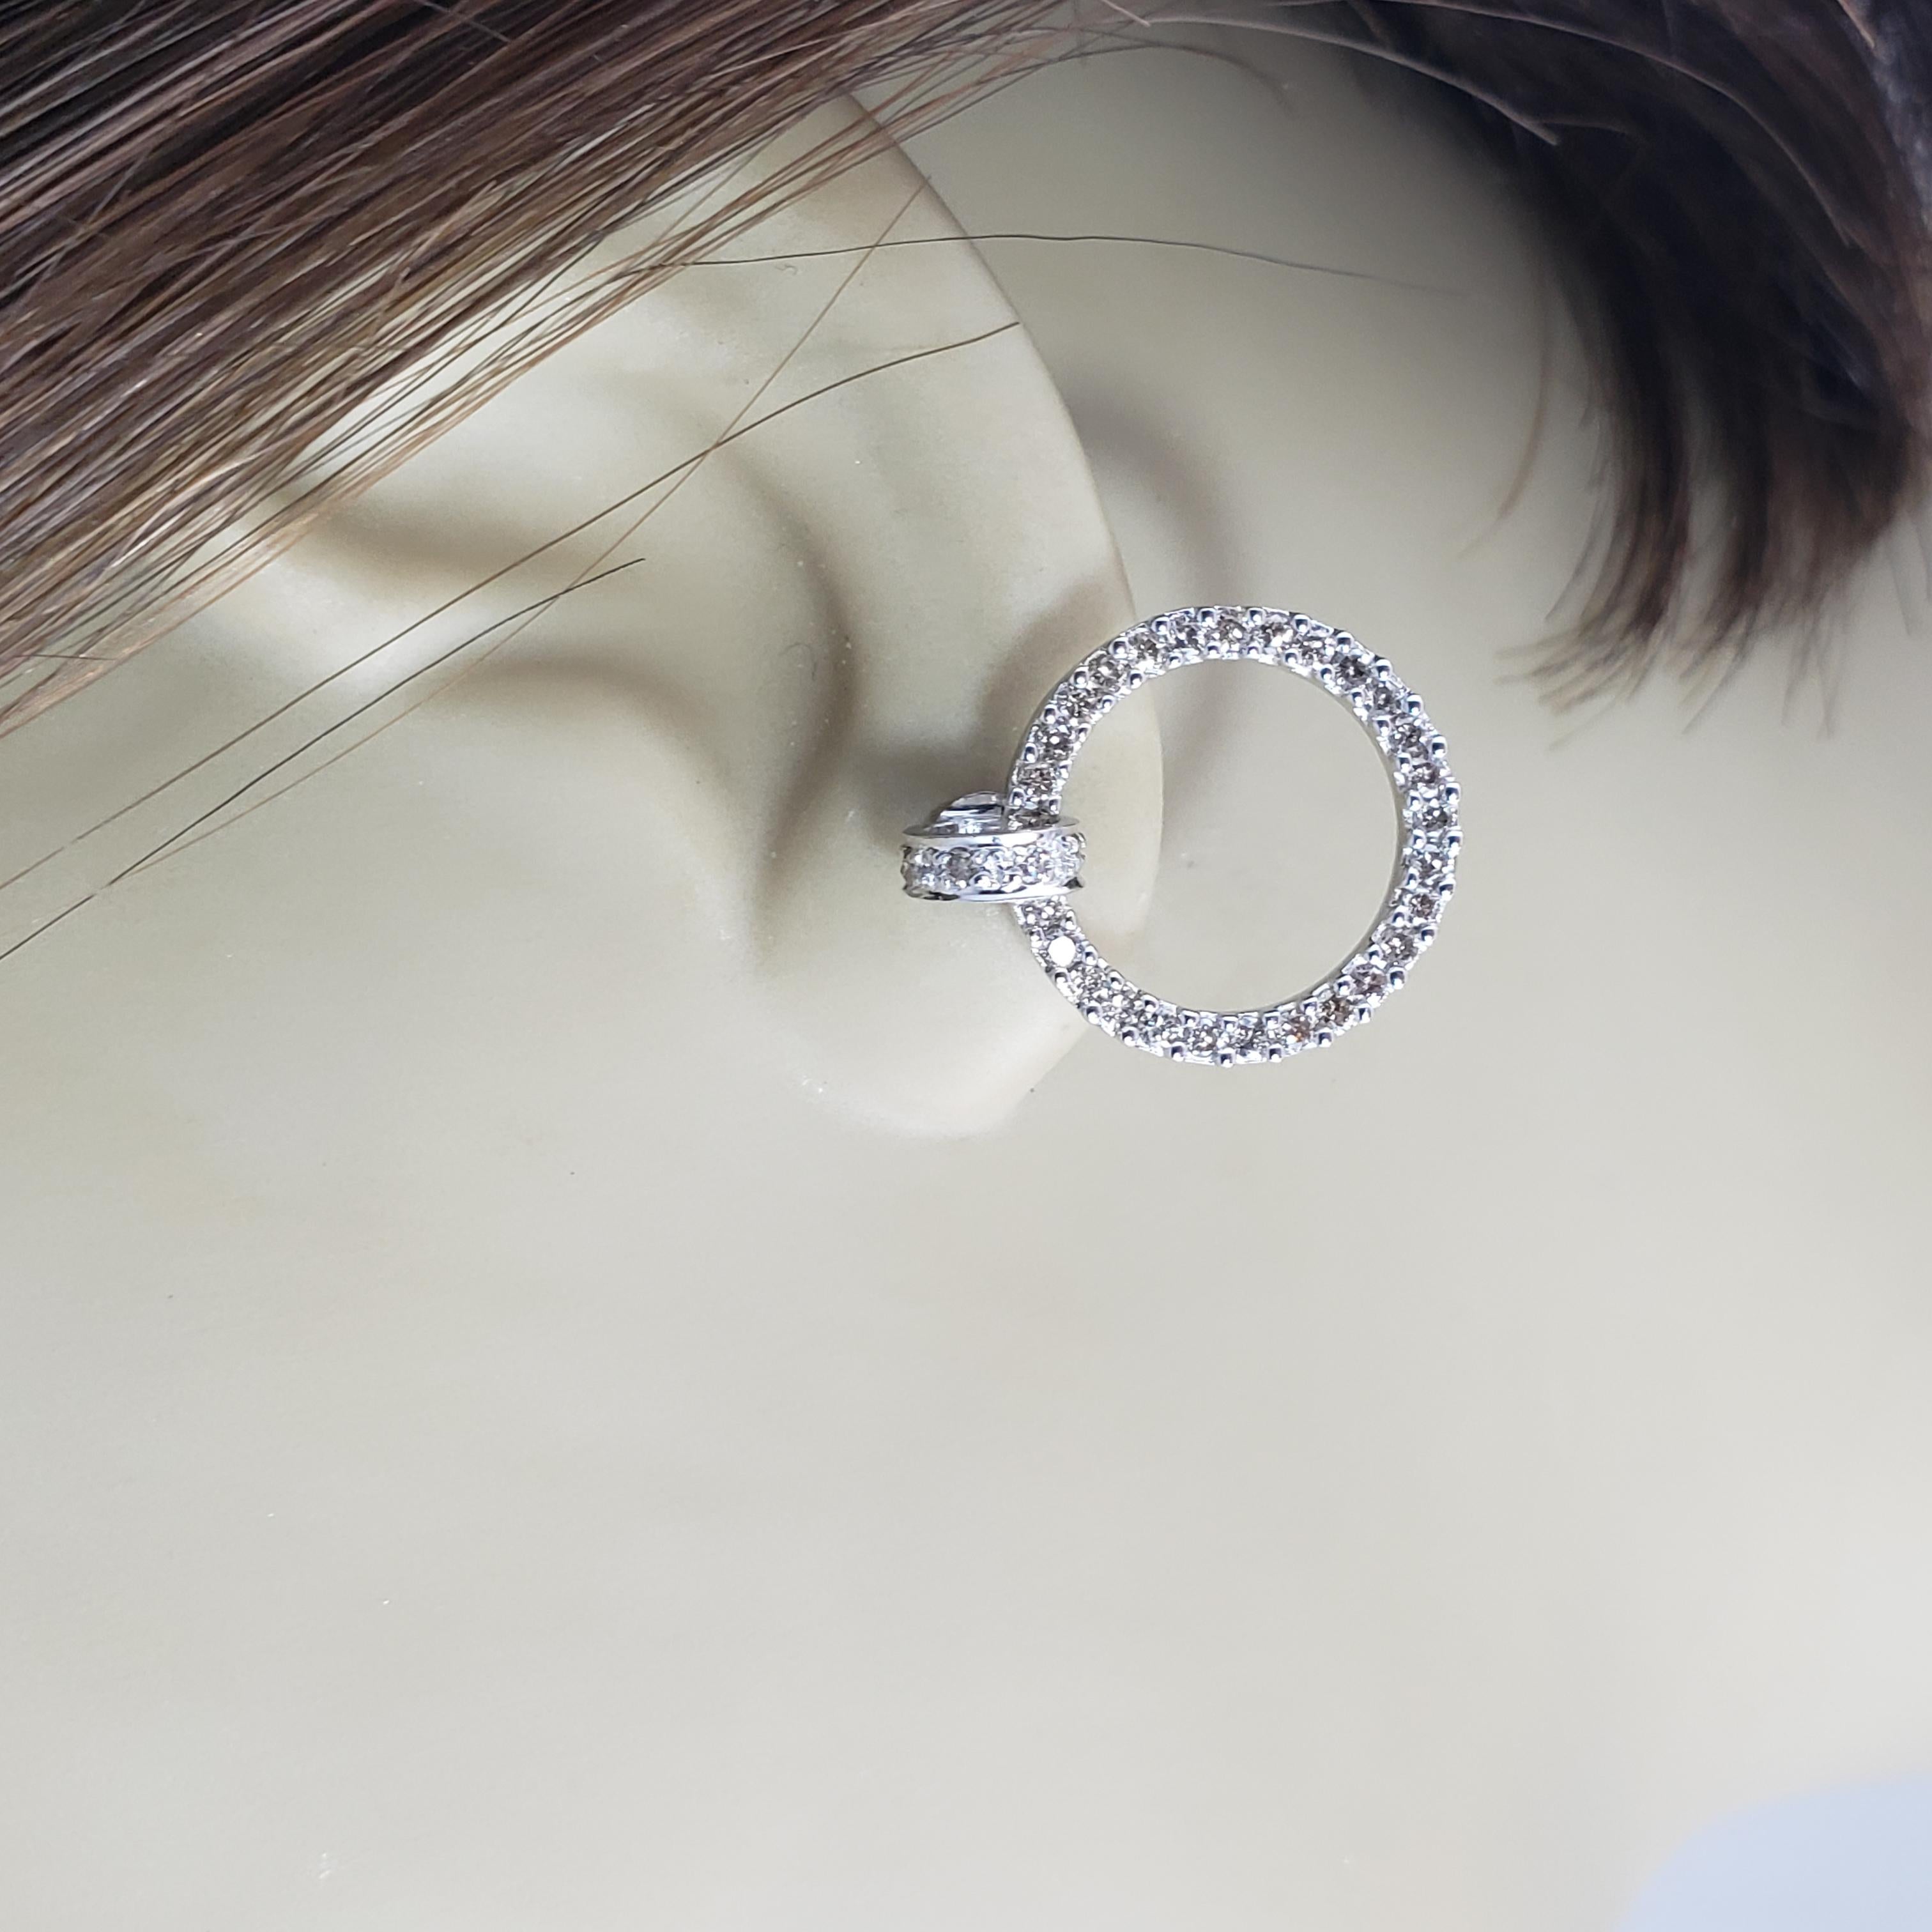 Vintage 14 Karat White Gold and Diamond Hoop Earrings-

These sparkling hoop earrings each feature 35 round brilliant cut diamonds set in classic 14K white gold. Push back closures.

Approximate total diamond weight: .70 ct.

Diamond color: